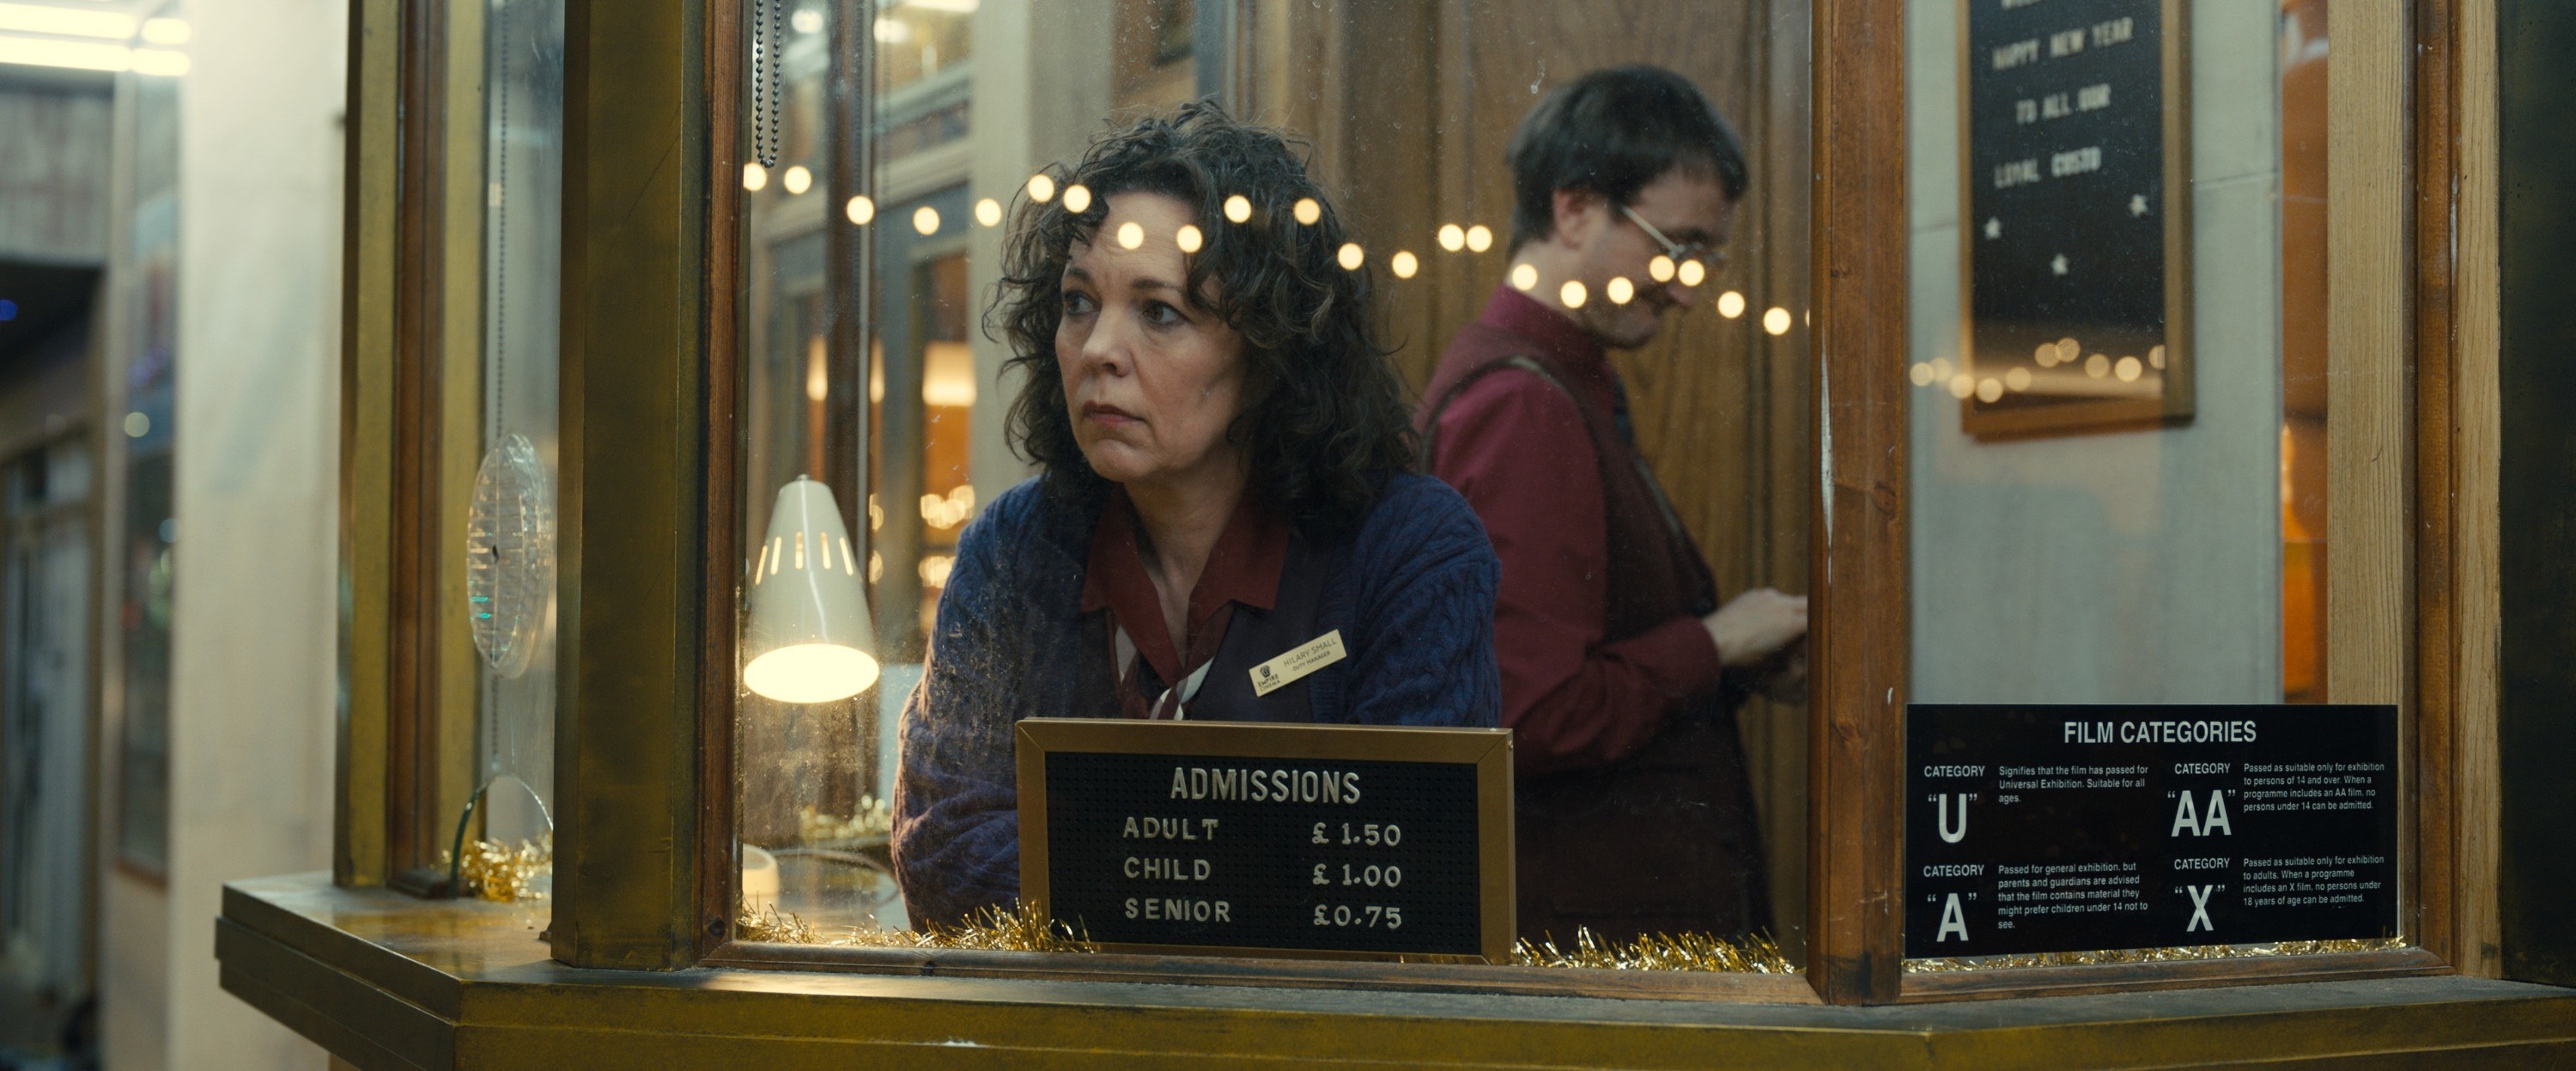 Olivia Colman stands in a ticket booth